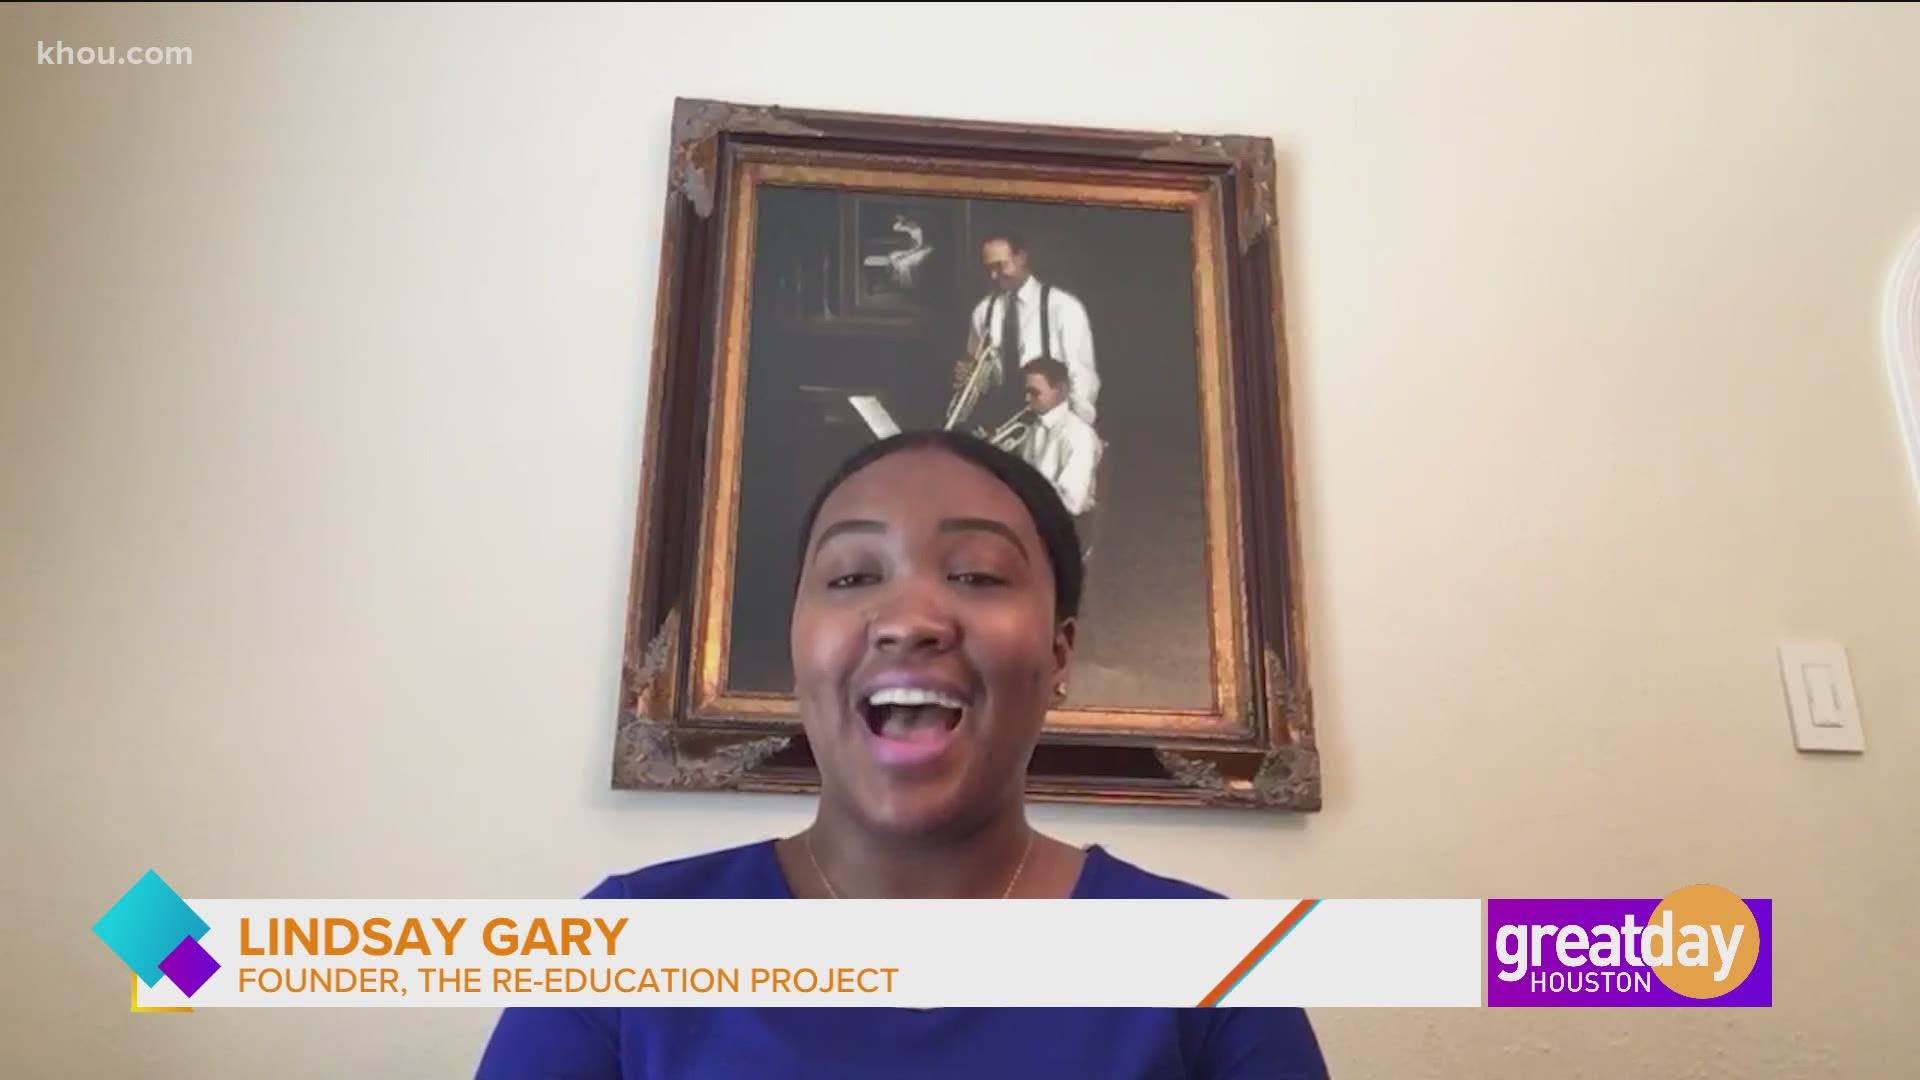 Lindsay Gary with the The Re-Education Project is empowering African American youth with the tools to become global change agents.